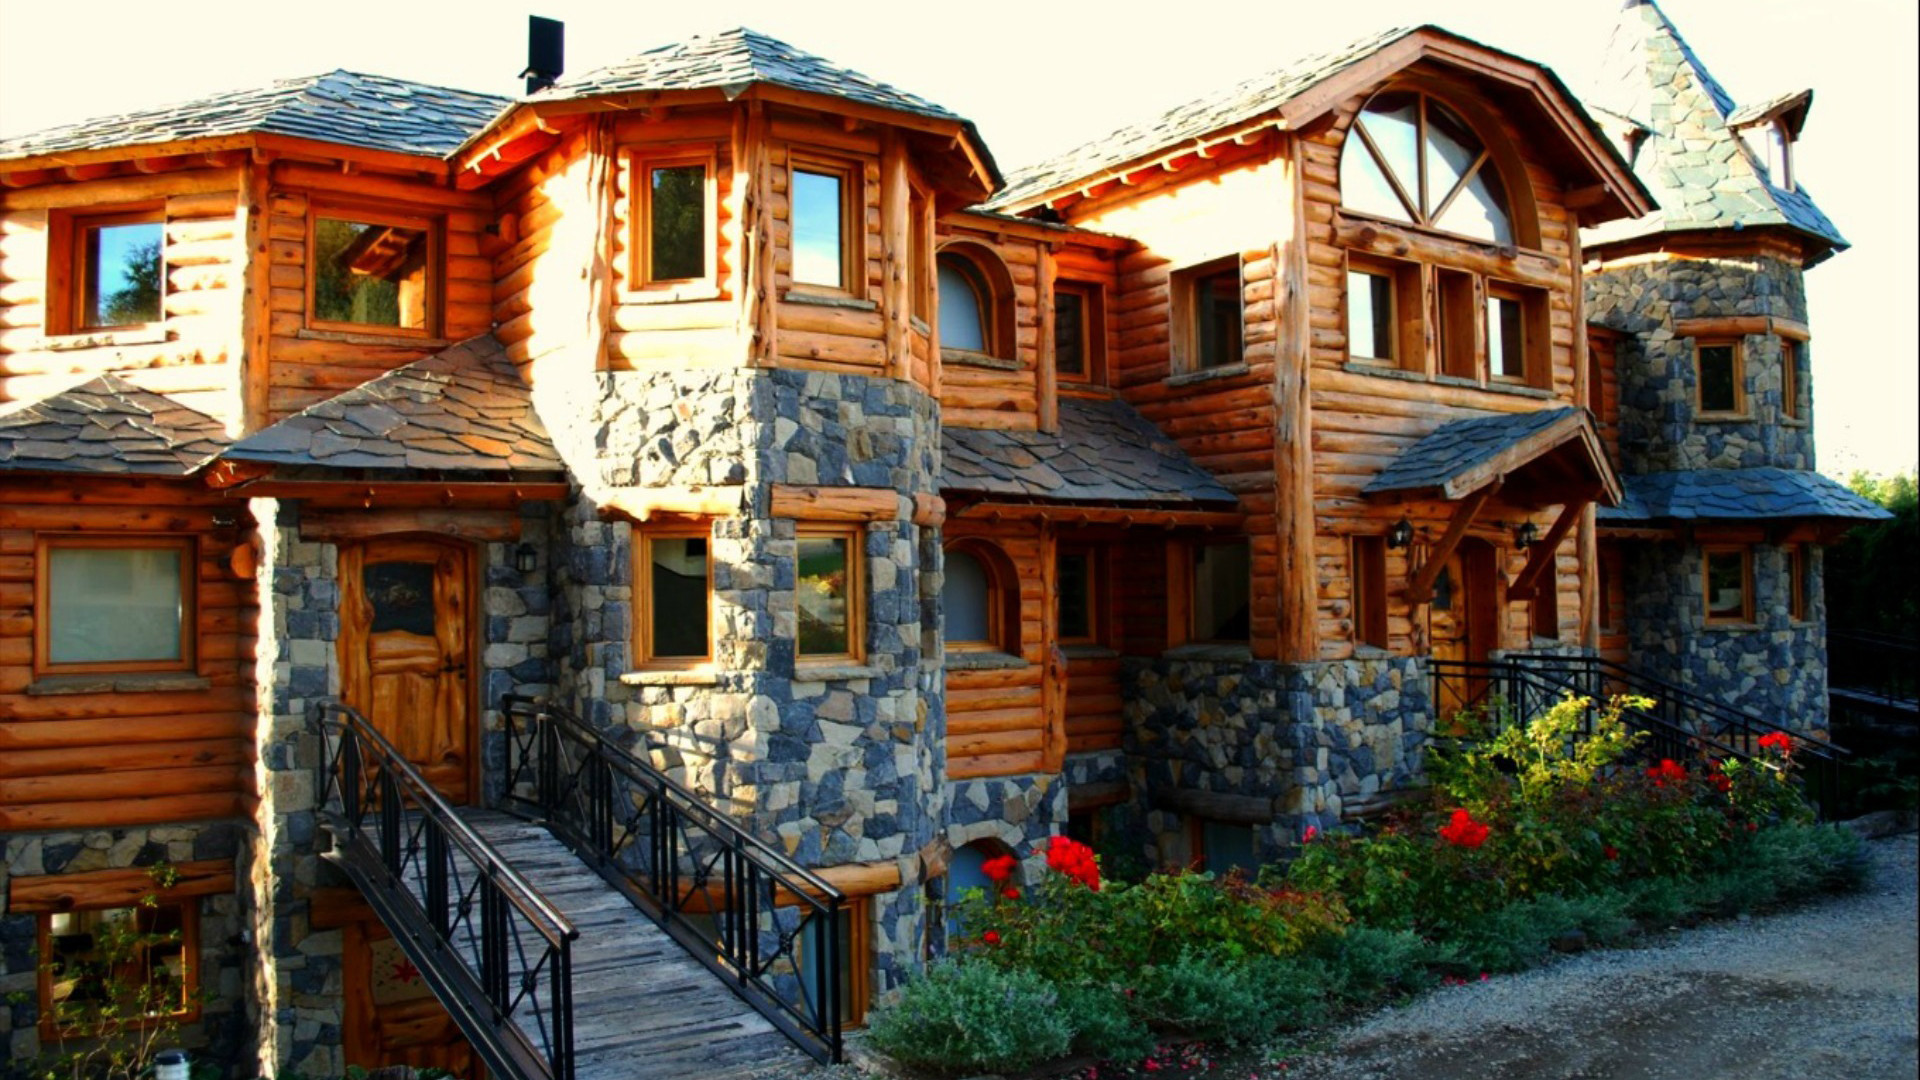 House Made Of Wood And Stones Hd Wallpaper Background Image